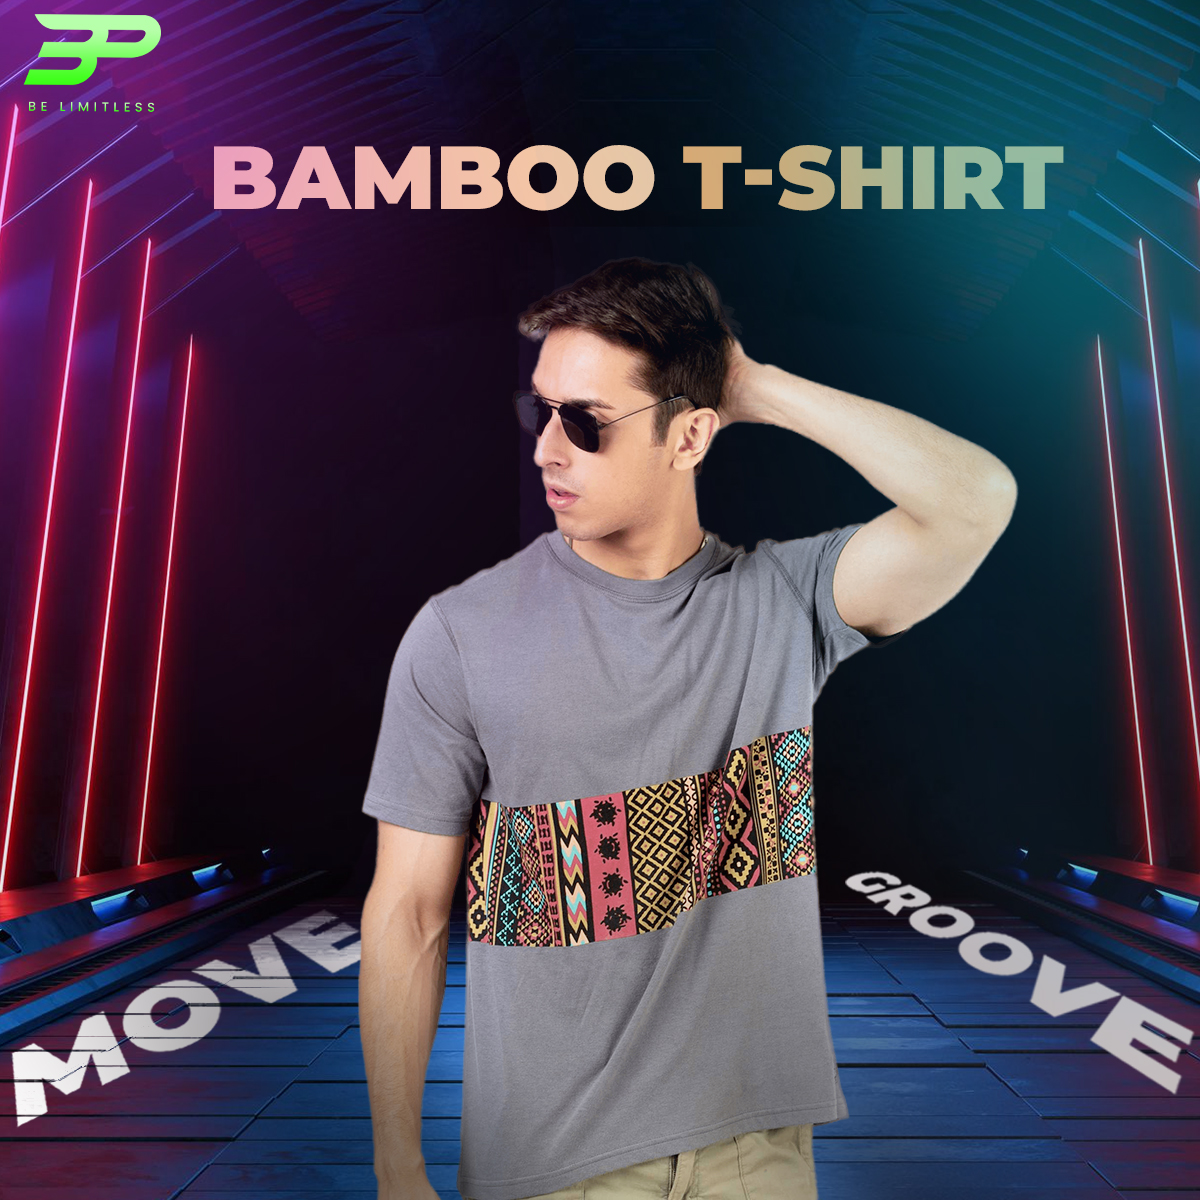 Move , Groove , Chill with our BAMBOO athleisure any day, any occasion T shirt.

#bambootshirt #bambootshirts #bambootshirt📷 #bambootee #bambootshirts #tshirts #summerstyle #ecofriendlytshirt #onlinetshirtstore #onlinetshirts #Bamboo #bambooclothing #fashionstyle #3rdplanet